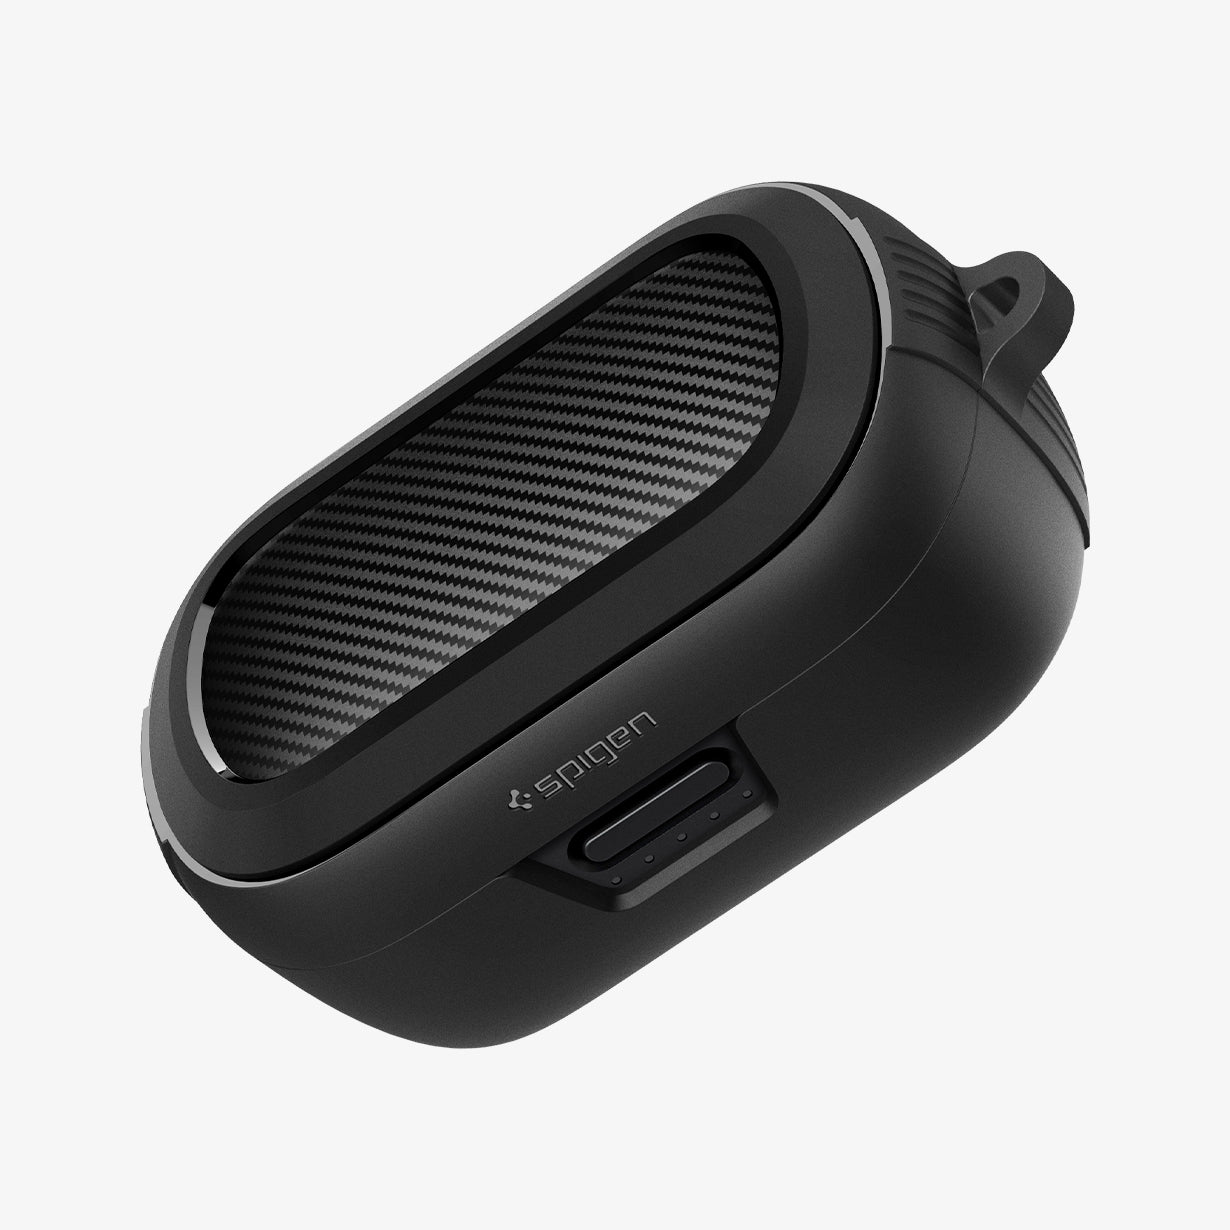 ASD02487 - Bose Earbuds Quiet Comfort Case Rugged Armor in black showing the front, top and side